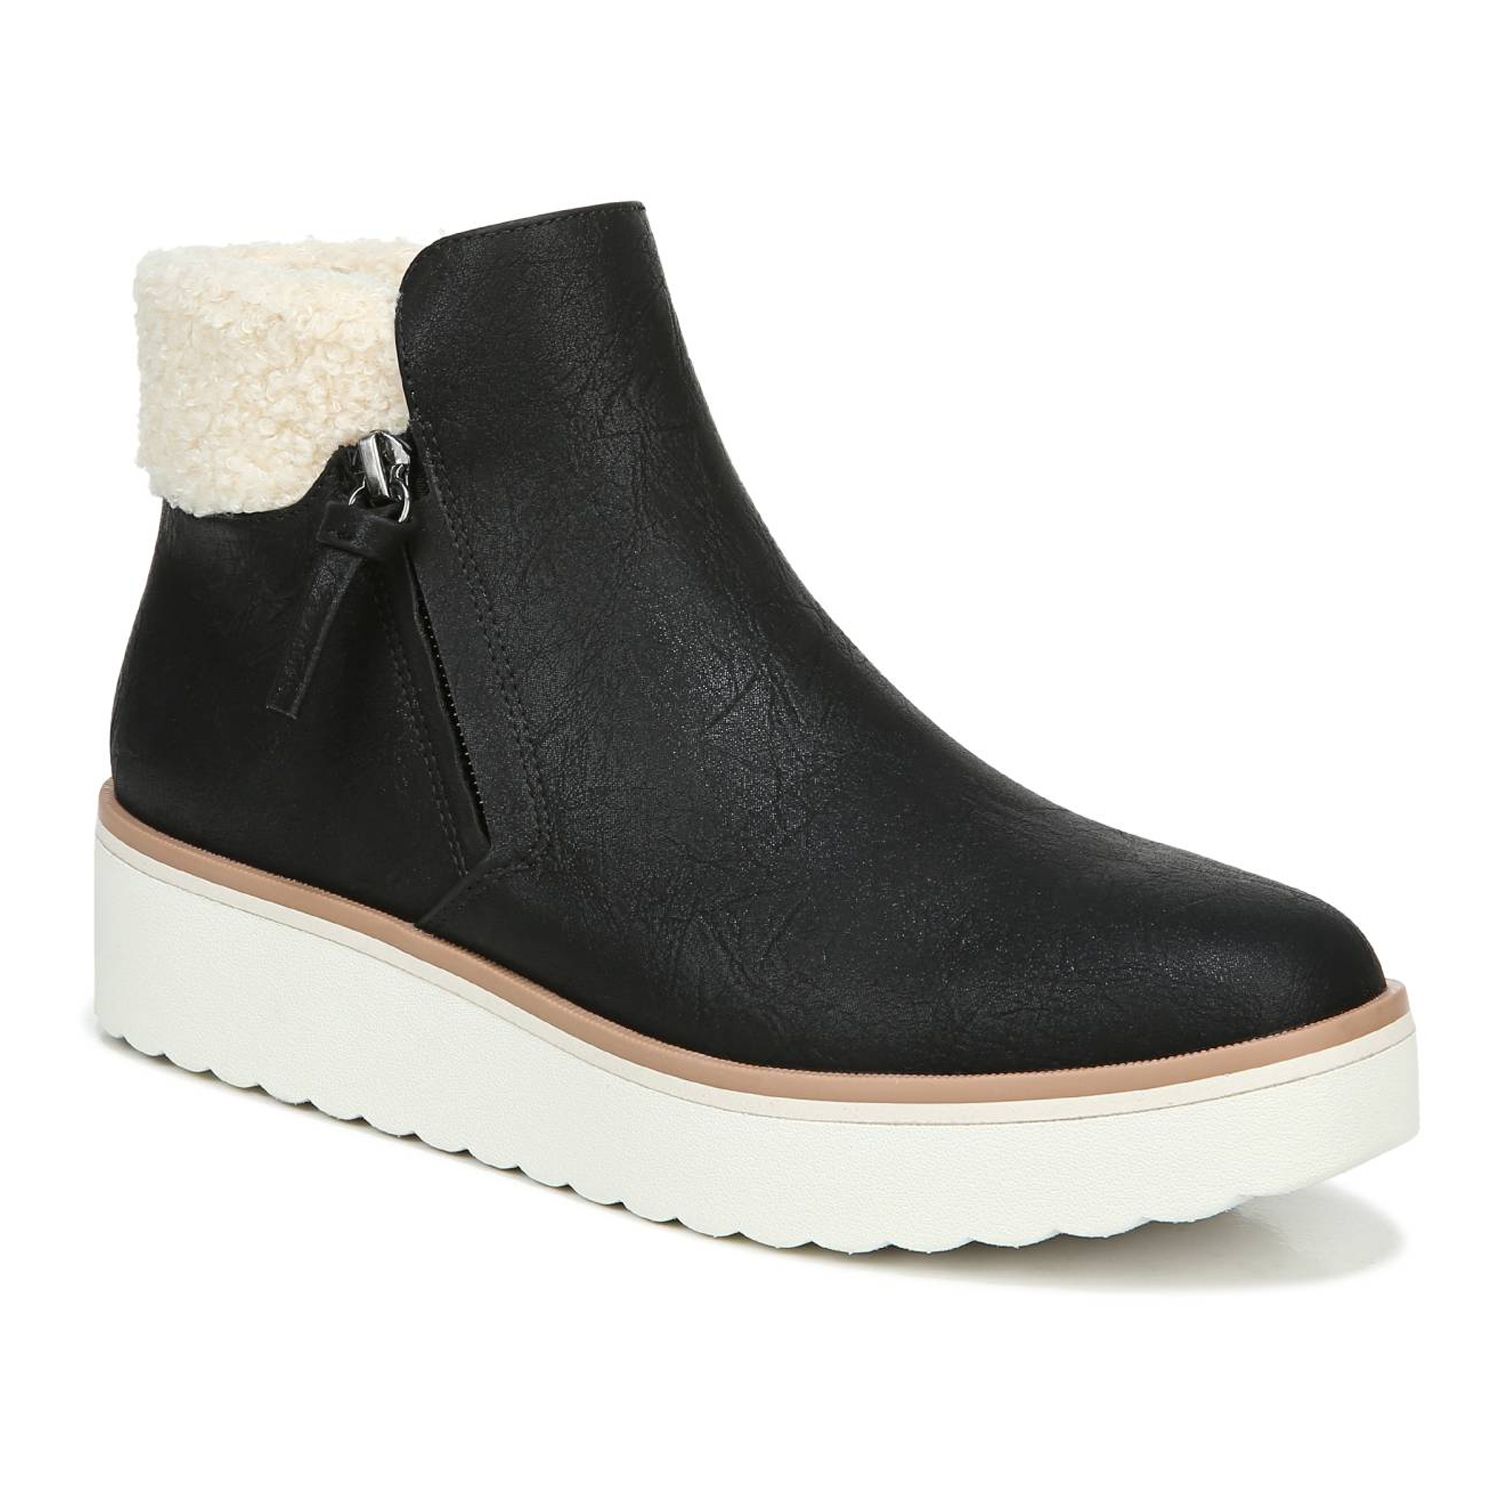 Lunar Women's Shearling Ankle Boots